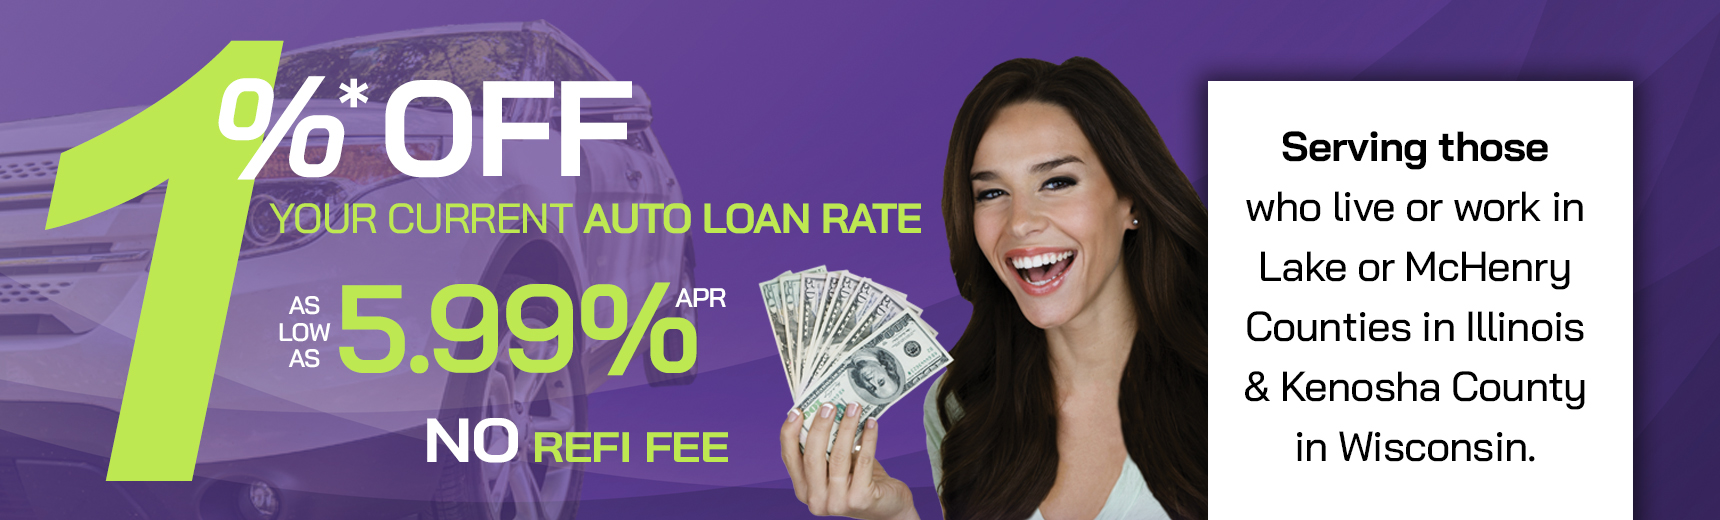 1% Off your current auto loan rate as low as 5.99% apr no refi fee serving those who live or work in lake or mchenry counties in illinois &amp; kenosha county in wisconsin